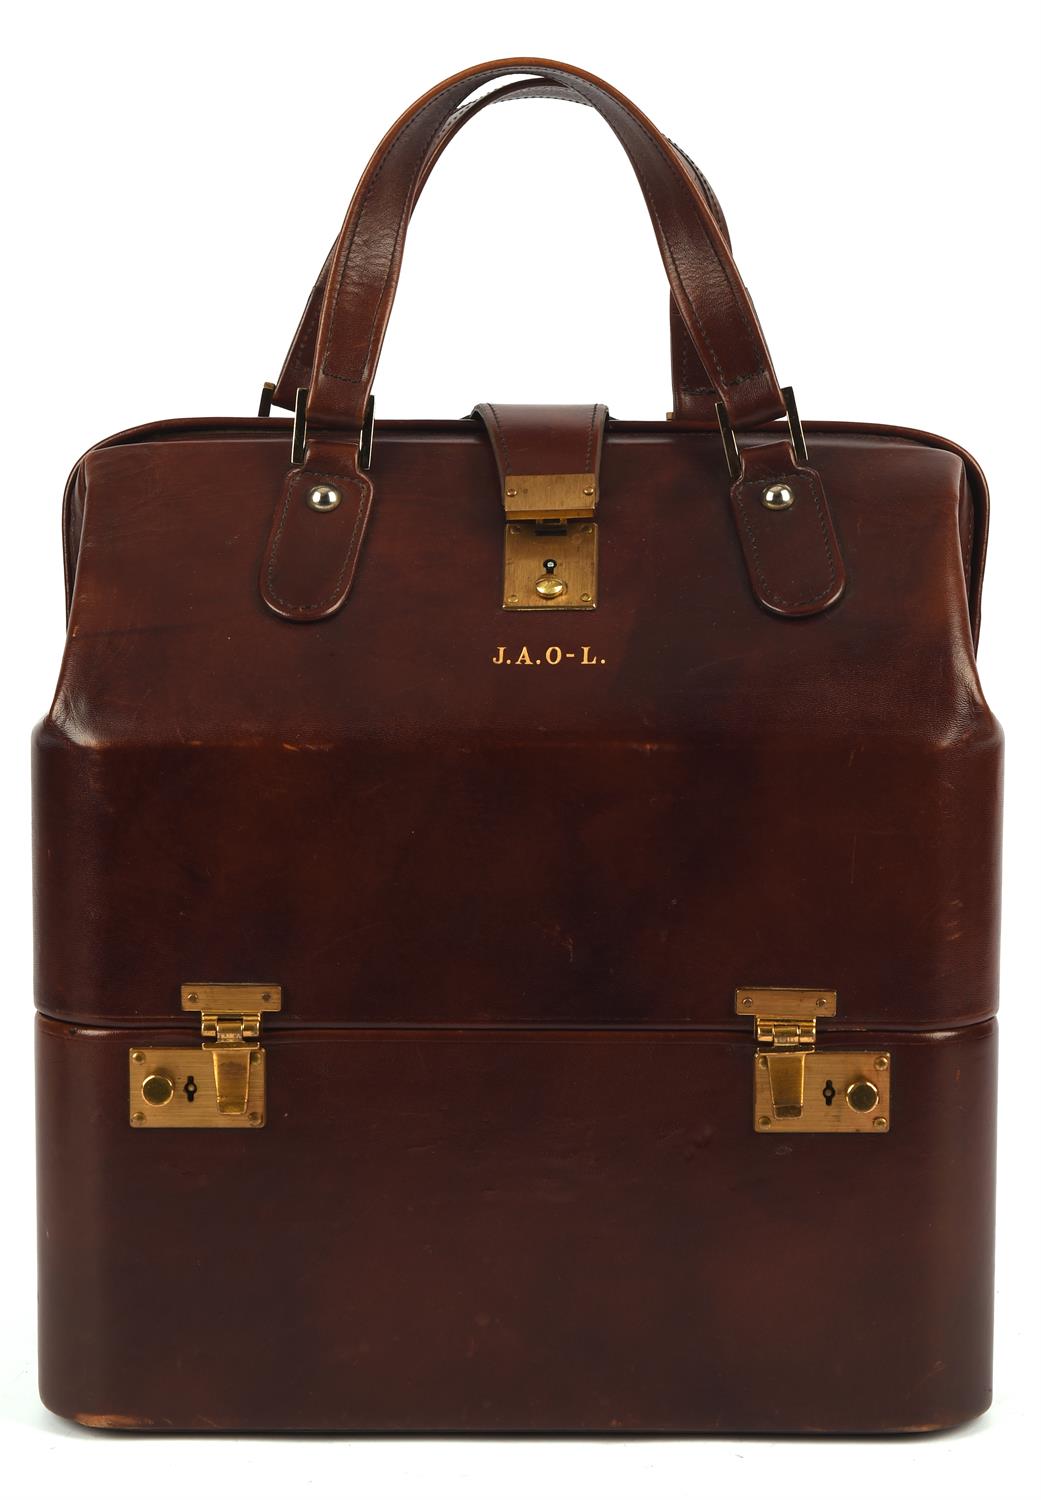 ASPREY quality brown leather Gladstone style vintage travel case with brass hardware and keys (36cm